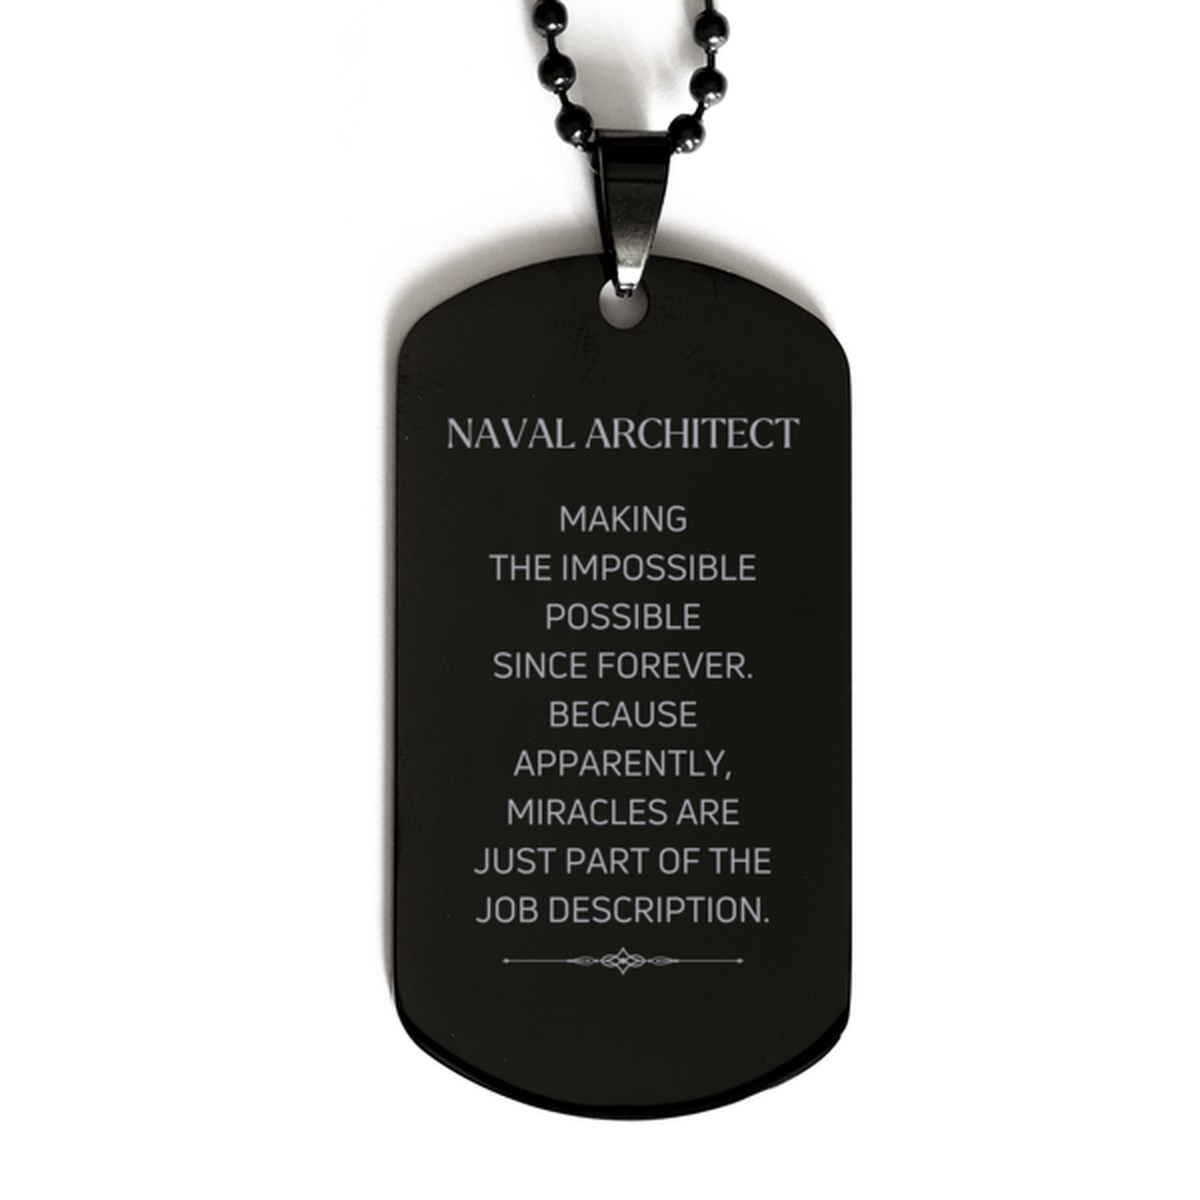 Funny Naval Architect Gifts, Miracles are just part of the job description, Inspirational Birthday Black Dog Tag For Naval Architect, Men, Women, Coworkers, Friends, Boss